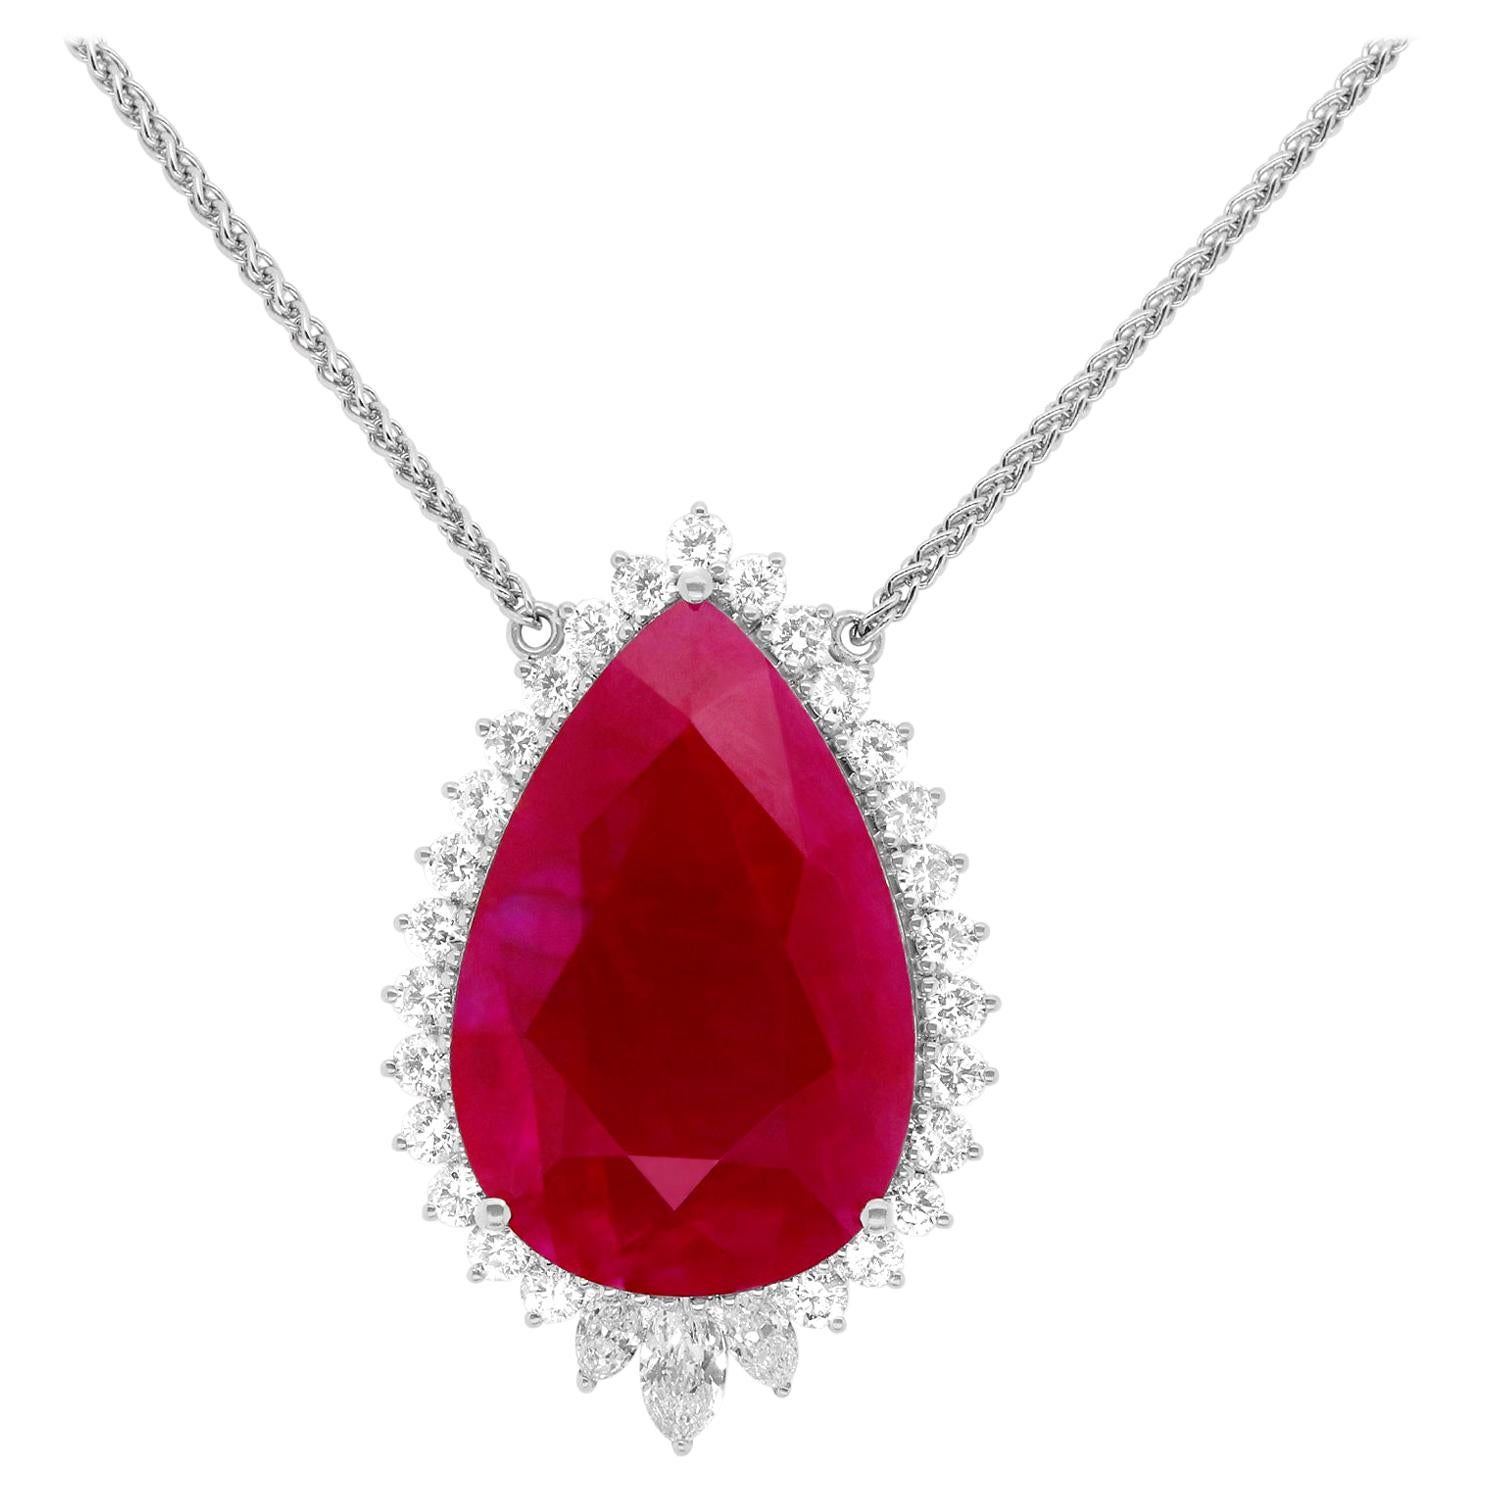 GRS Certified 43.29 Carat Pear Shaped Ruby Diamond Halo Necklace 18K White Gold For Sale